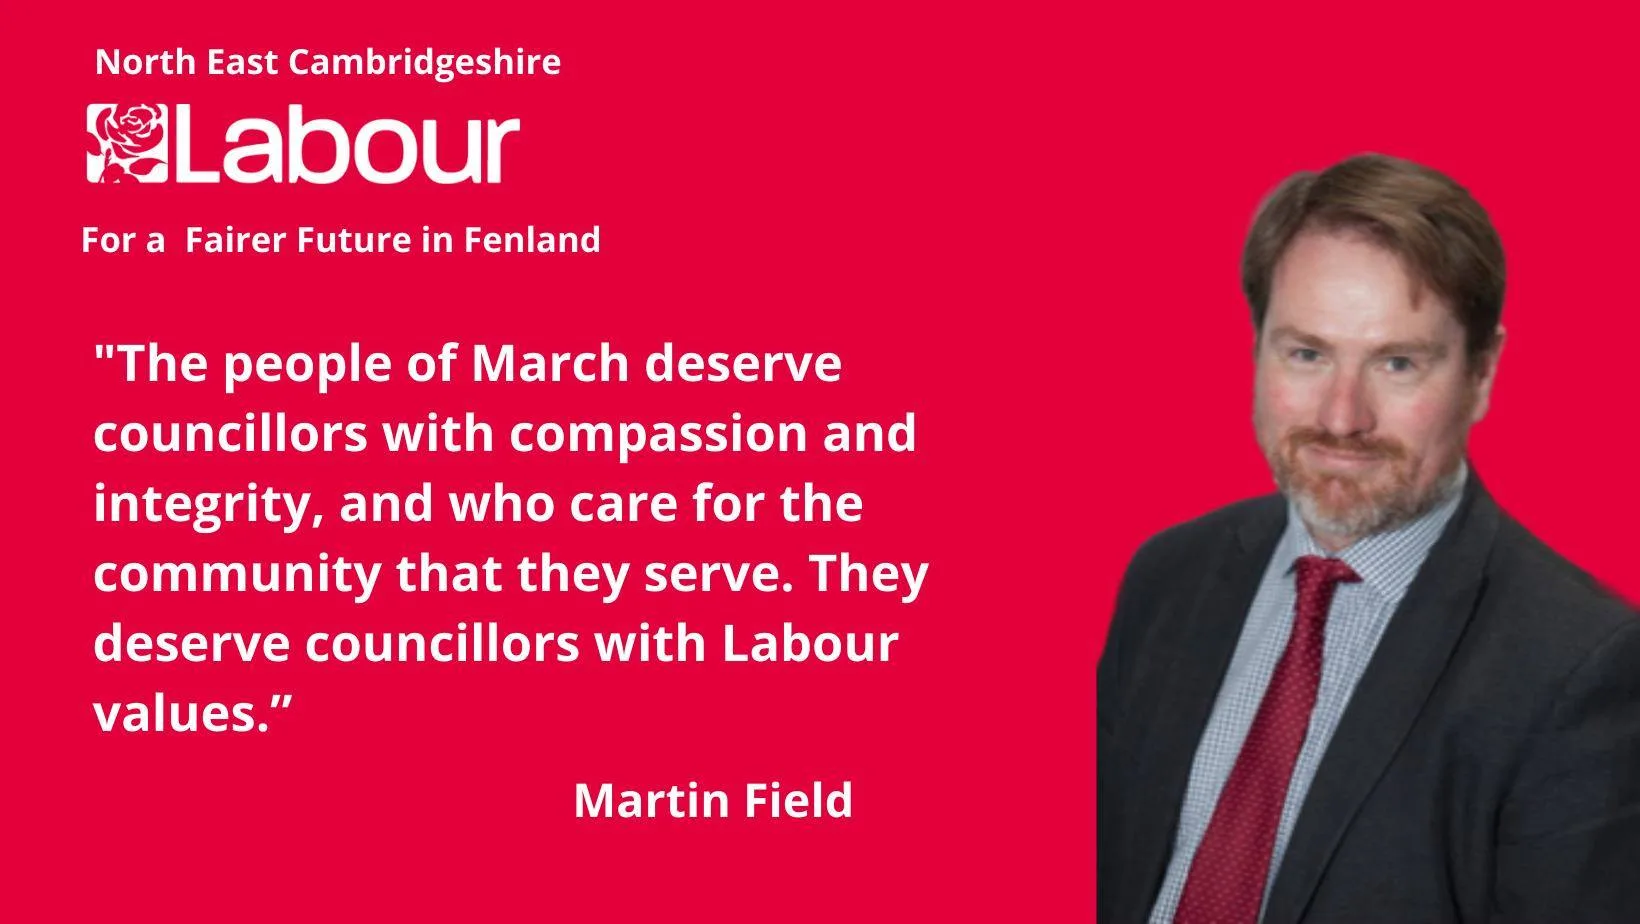 Martin Field said: “Next Thursday voters in Fenland have a choice. A vote for Labour is a vote to cut the cost of living, cut crime and cut waiting lists. That’s how we will build a better Fenland.”